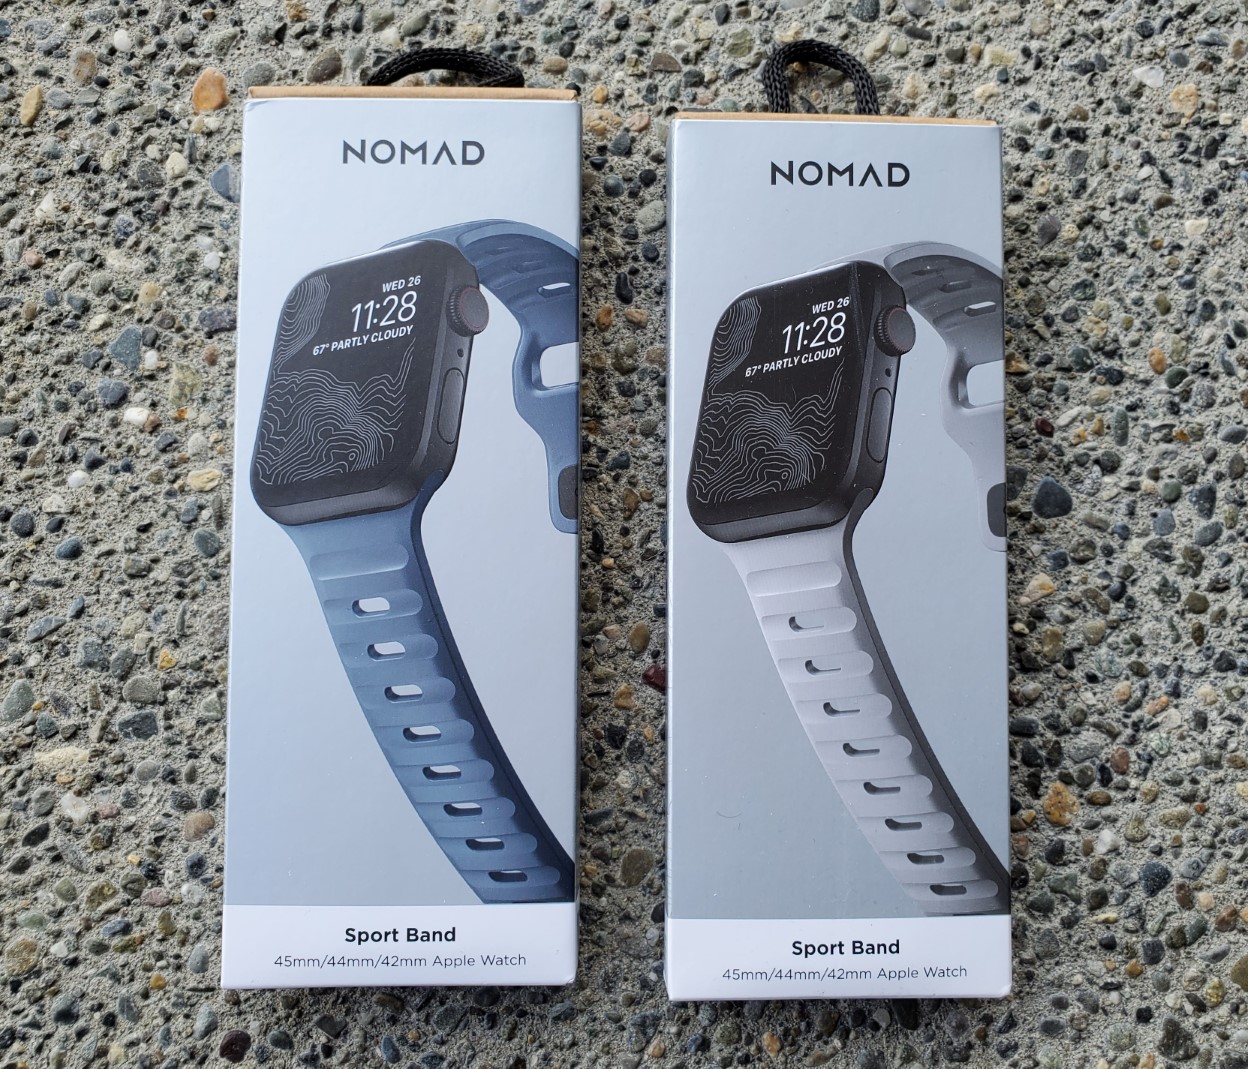 Nomad Sport band for Apple Watch 7 review: Optimal ventilation, light  weight, and high quality materials